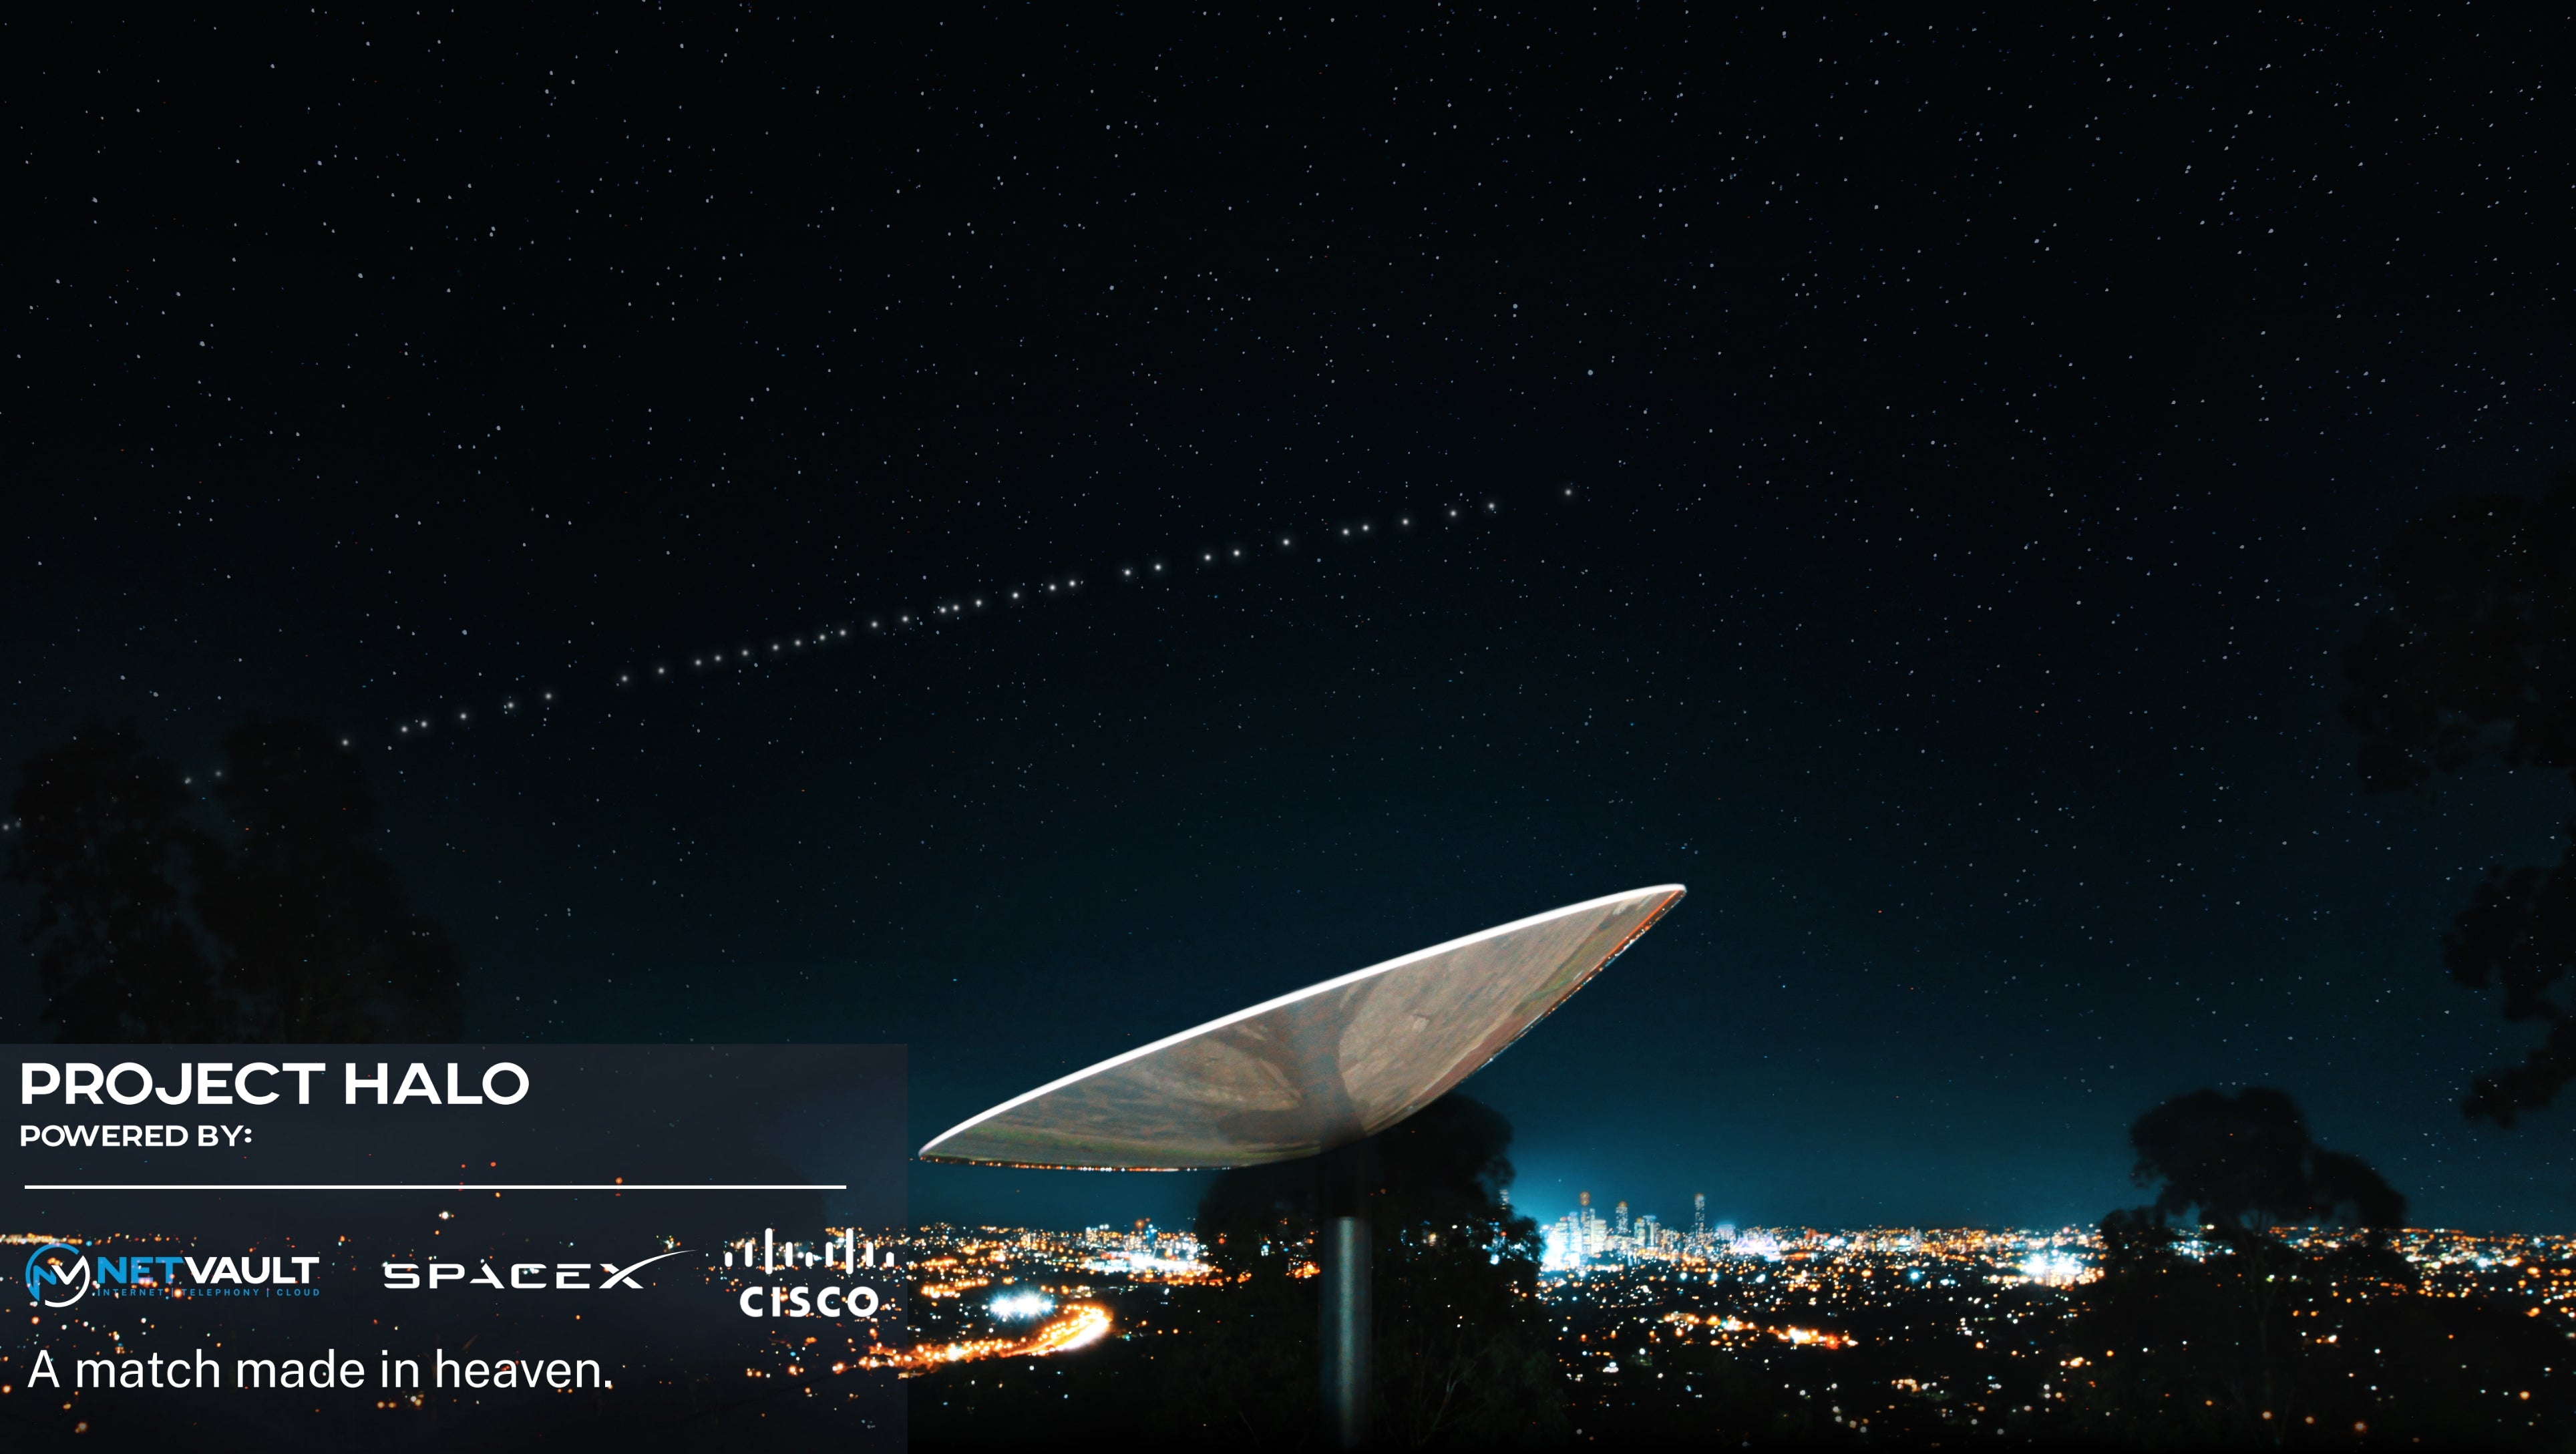 NetVault & Cisco Partner To Offer $100K Grant To Connect A Regional Australian School With SpaceX Starlink Network